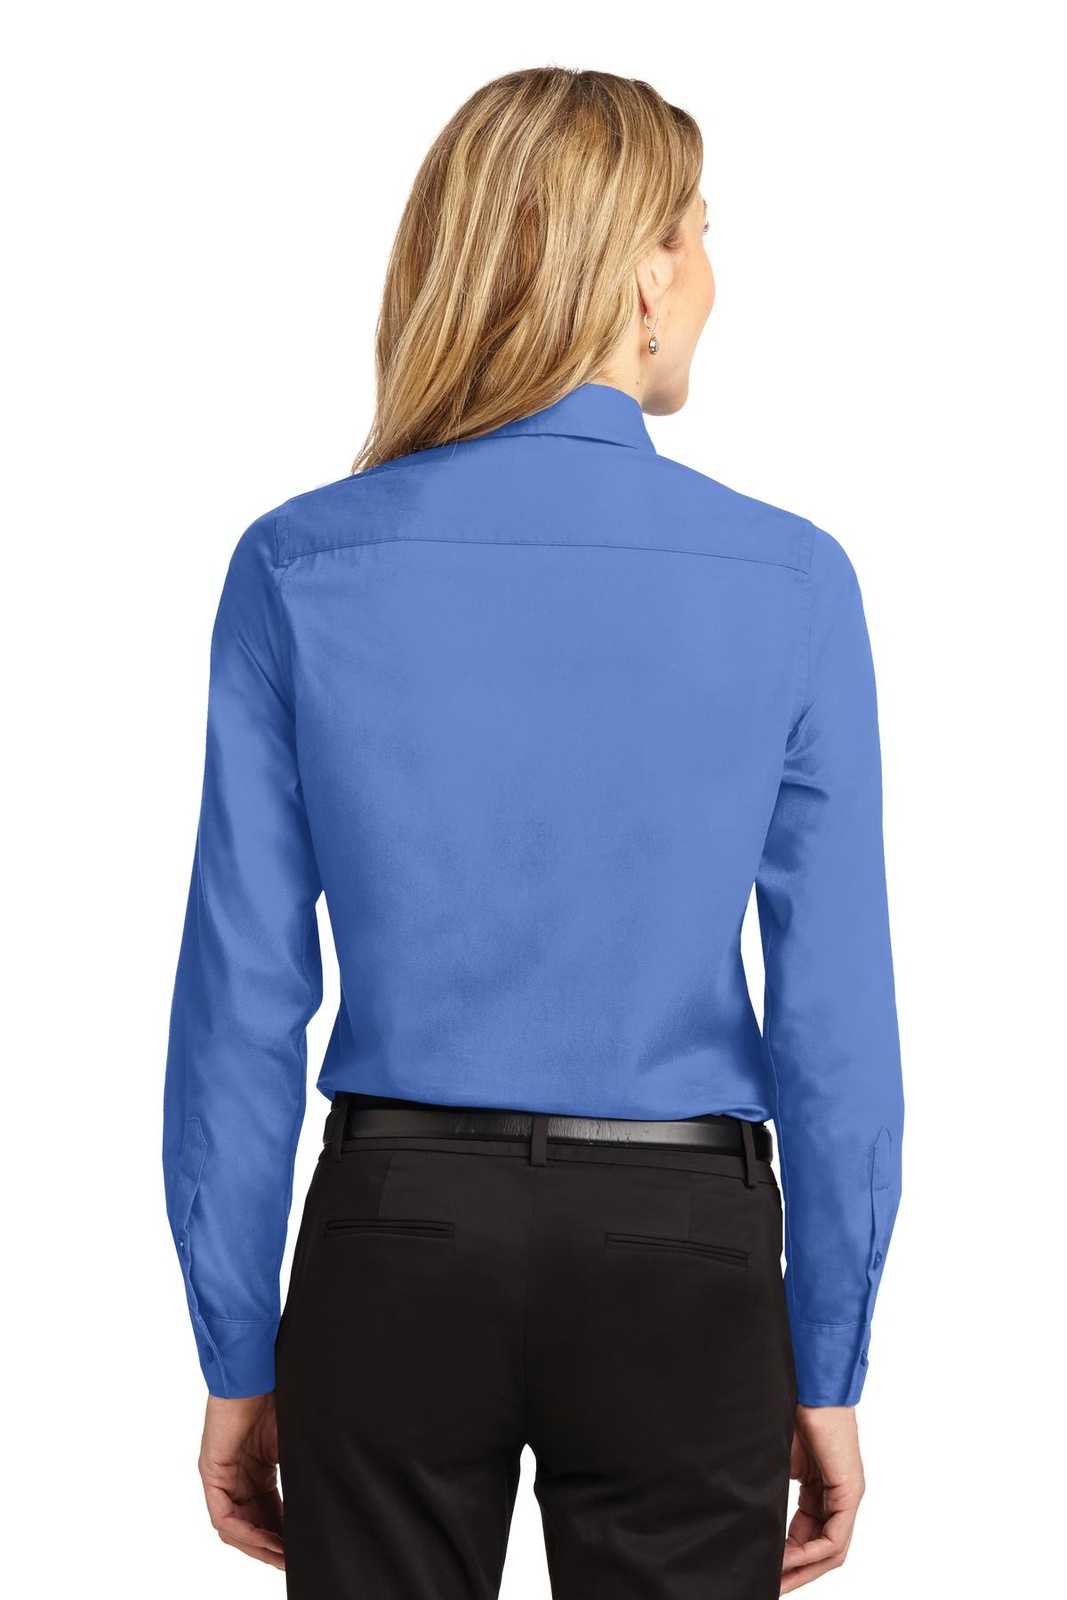 Port Authority L608 Ladies Long Sleeve Easy Care Shirt - Ultramarine Blue - HIT a Double - 1